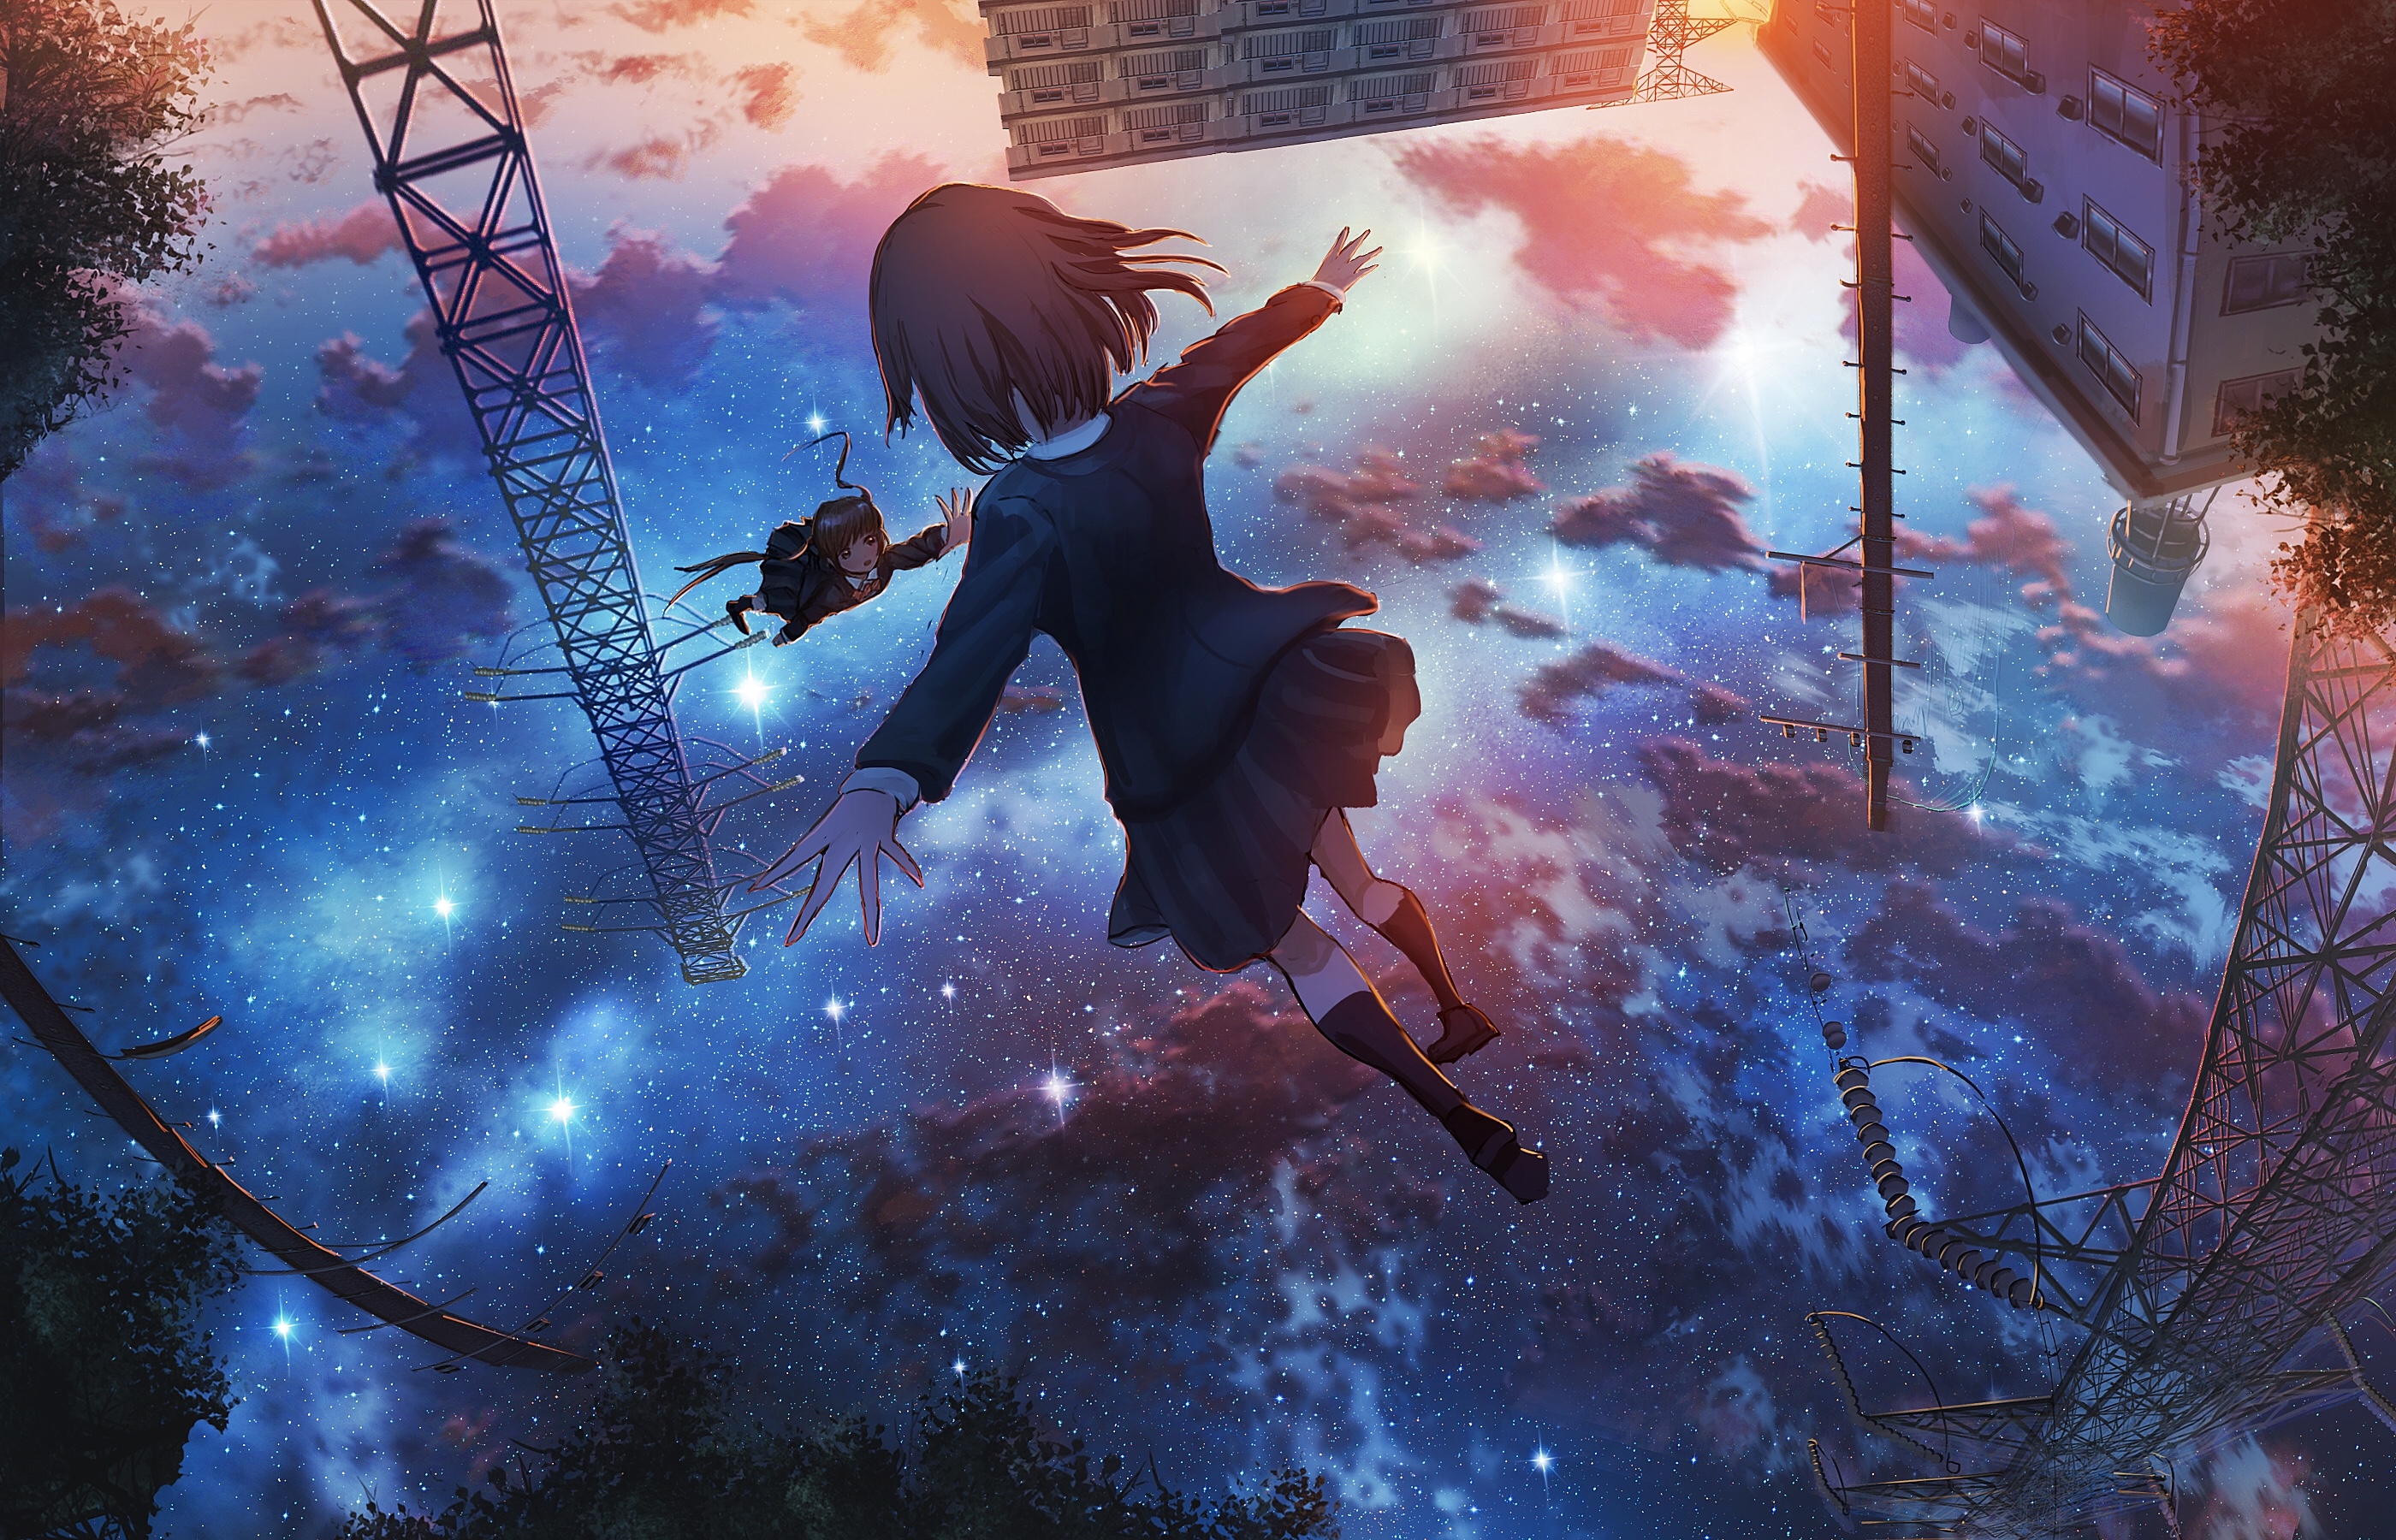 Inverted Anime Girls Moescape Anime Falling 2800x1800